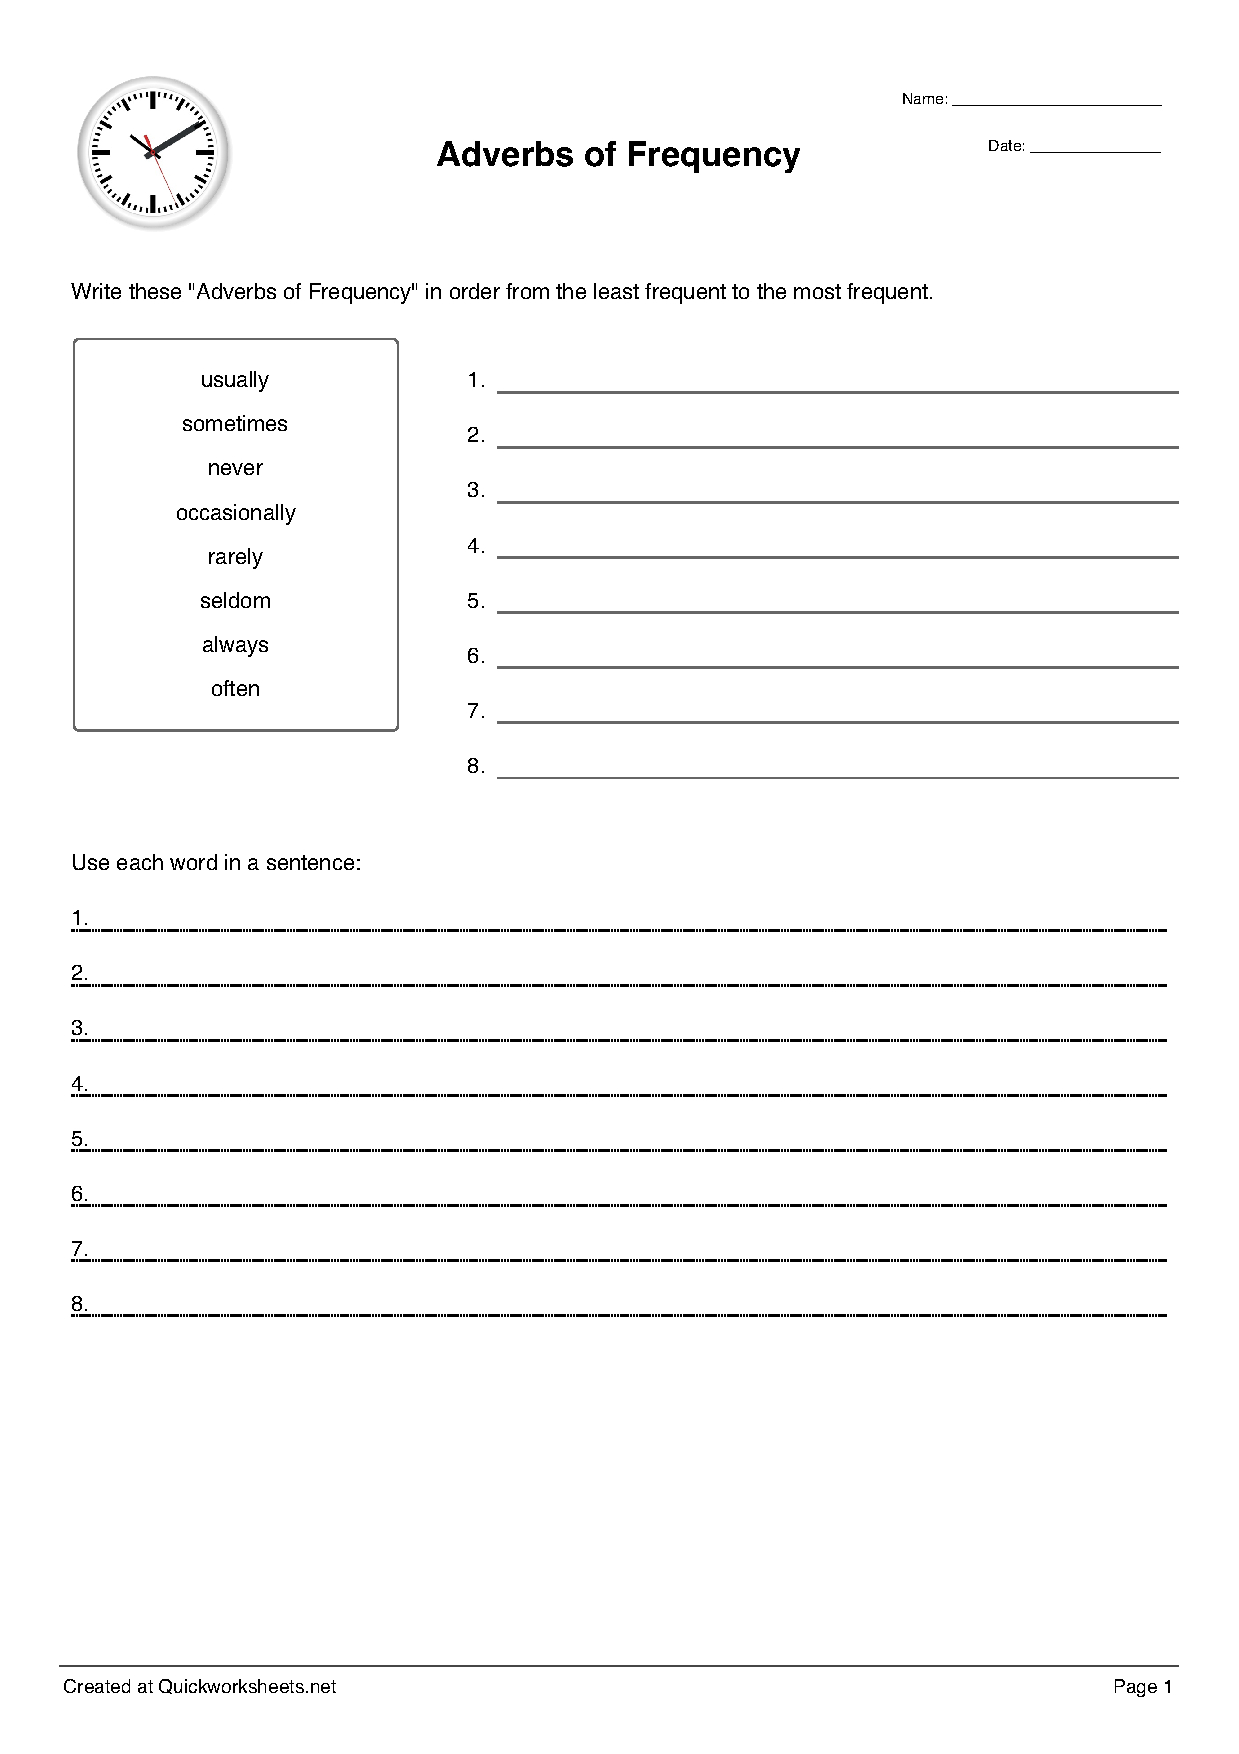 Word Scramble, Wordsearch, Crossword, Matching Pairs And Other - Free Printable Test Maker For Teachers